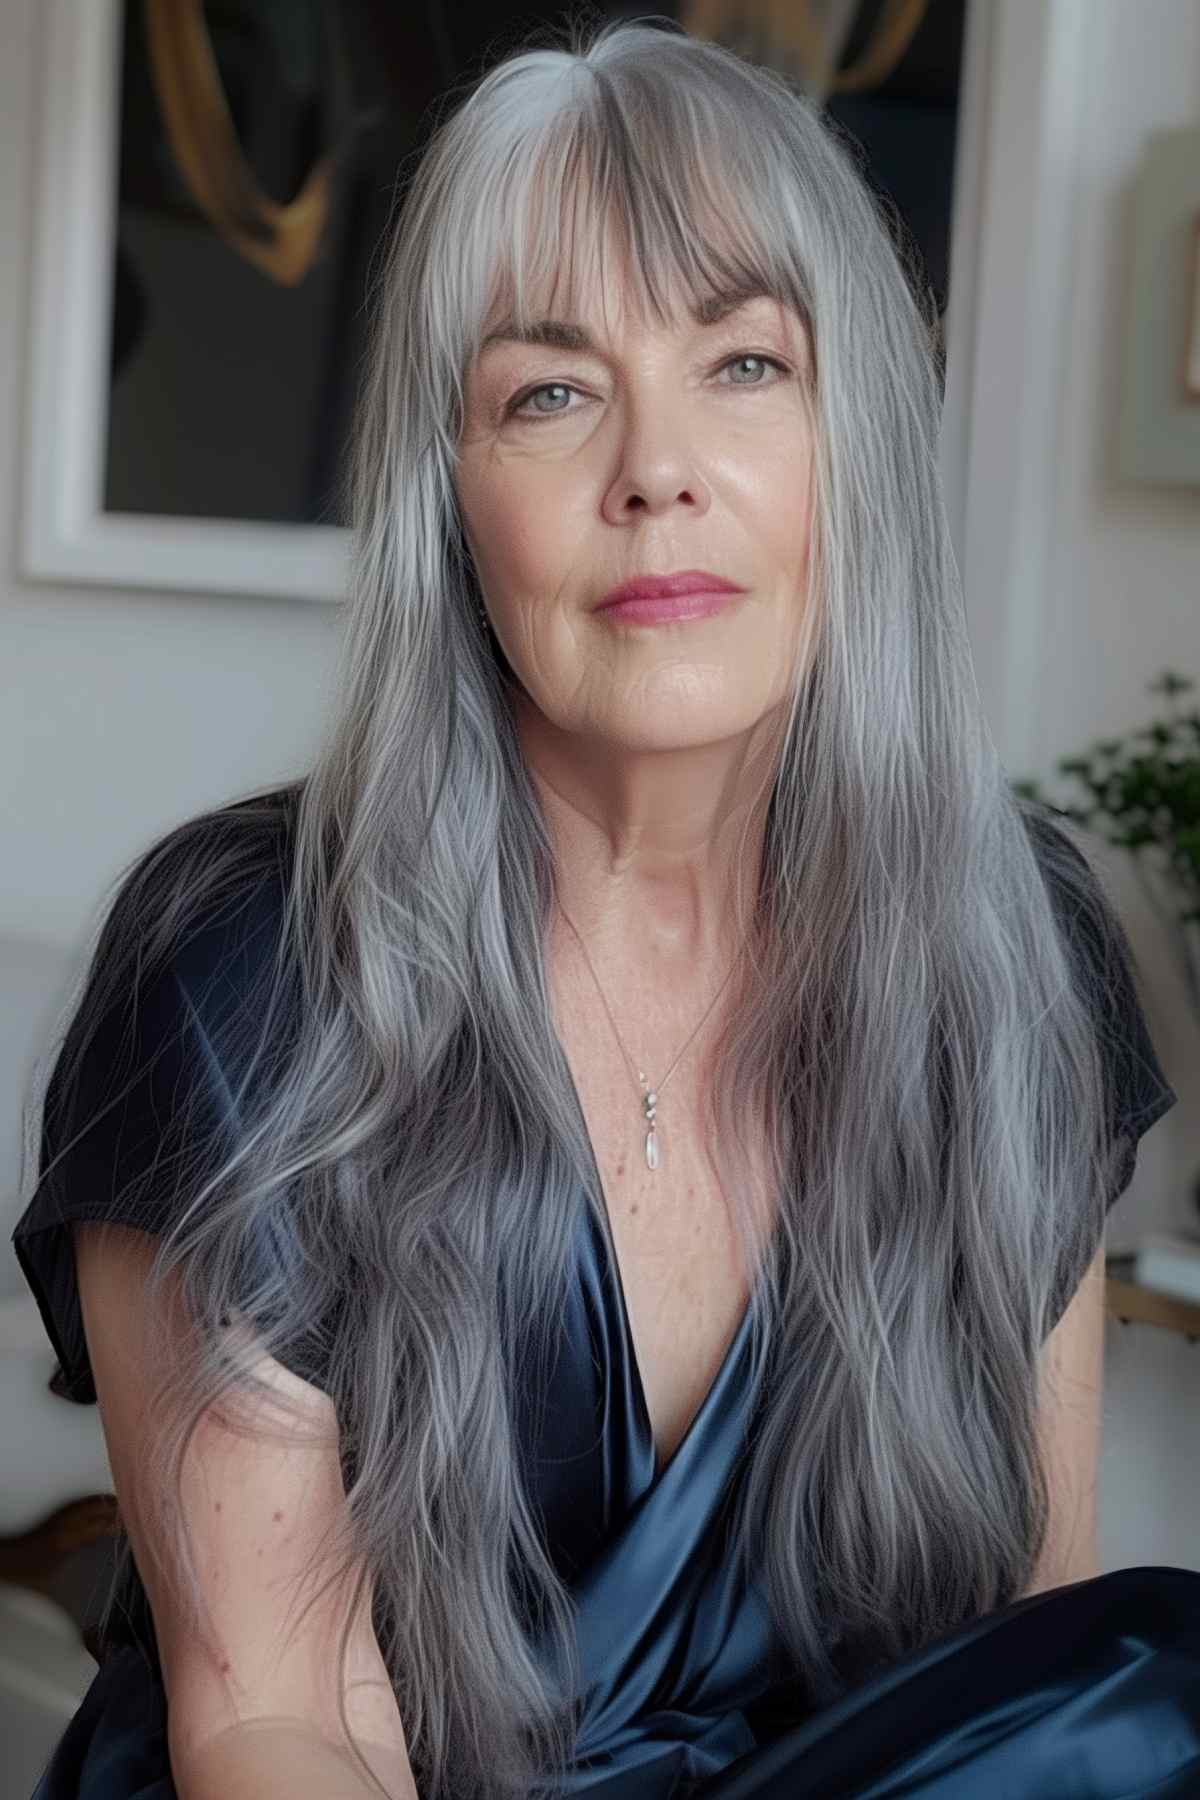 Mature woman with long wavy gray hair and straight bangs, dressed in a navy blue silk dress.